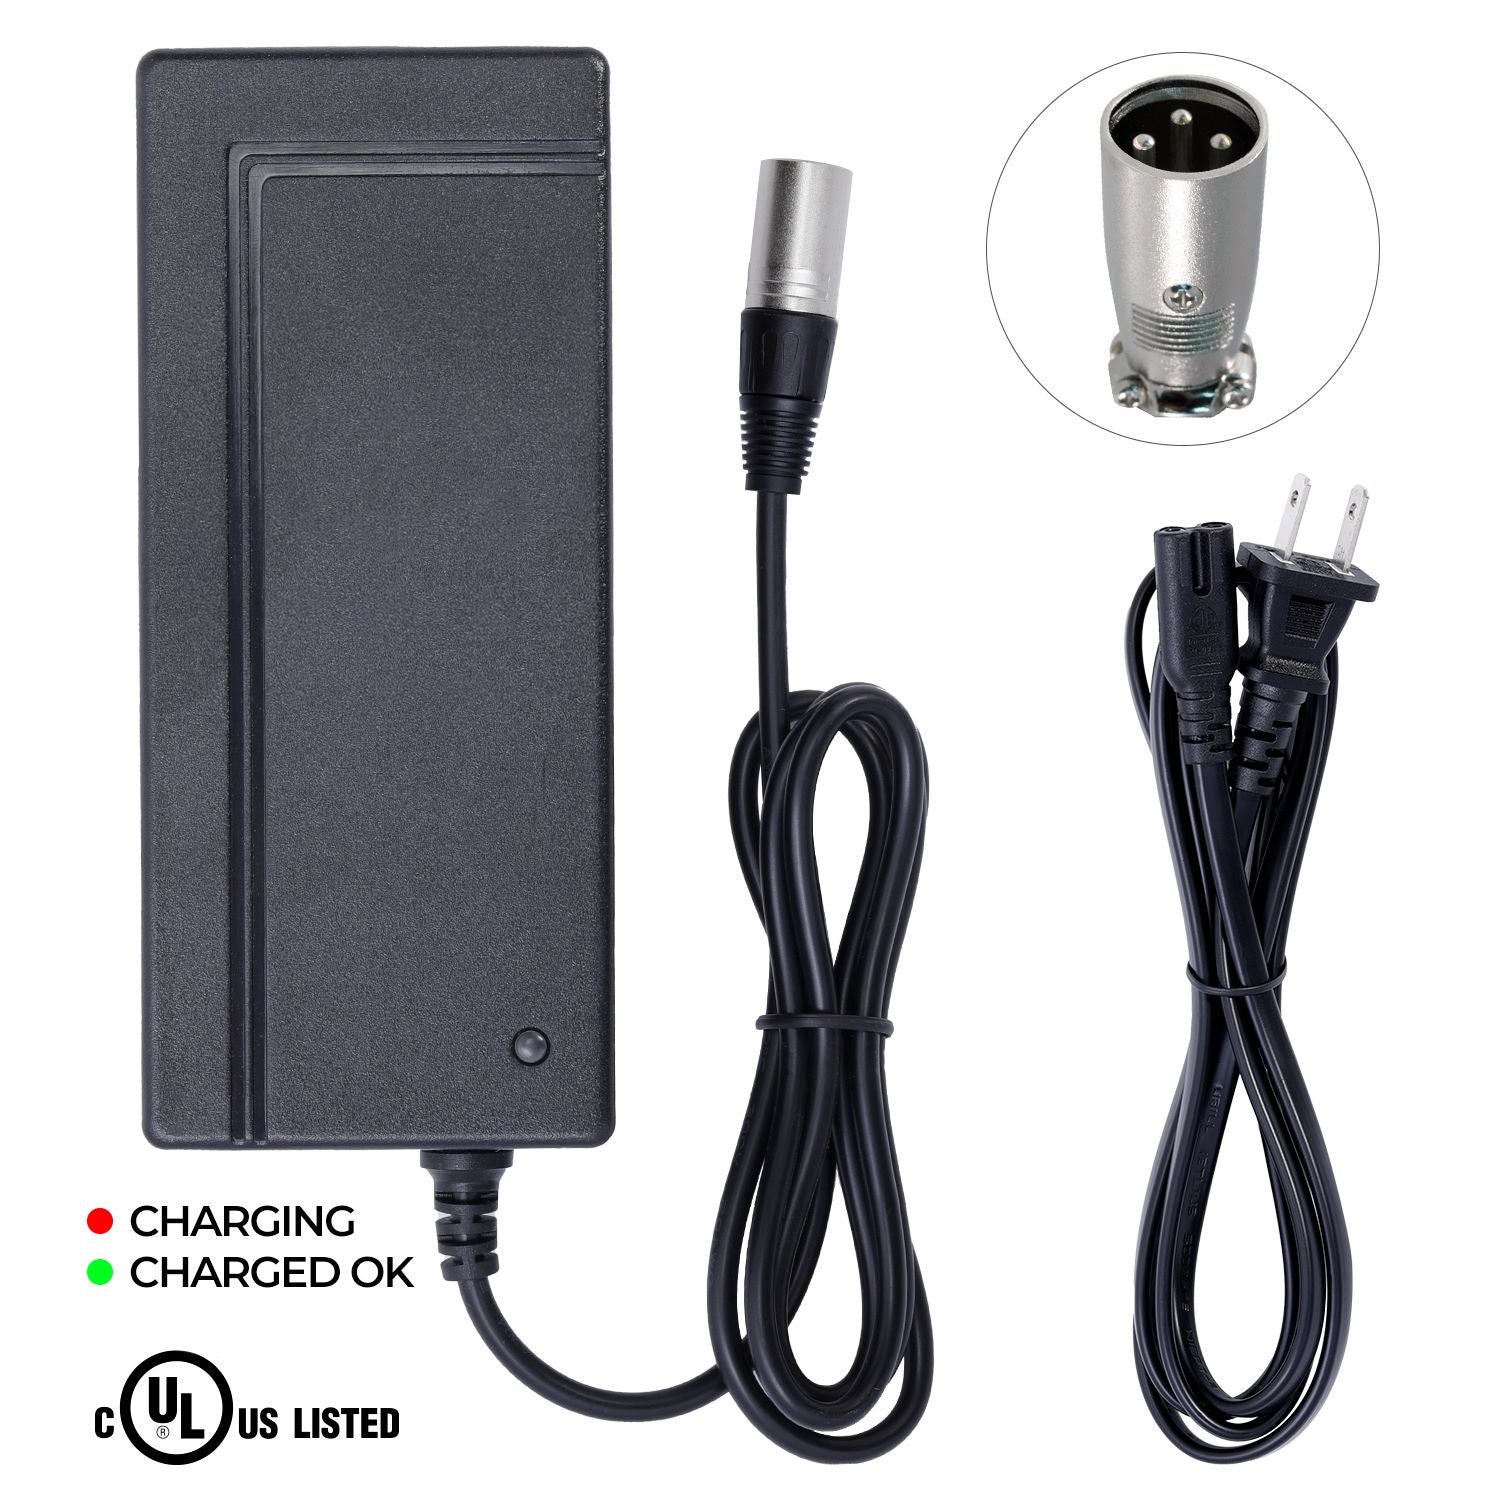 UL Certified Charger for Pride S73 Go Go Sport 3 Wheel Travel Scooter